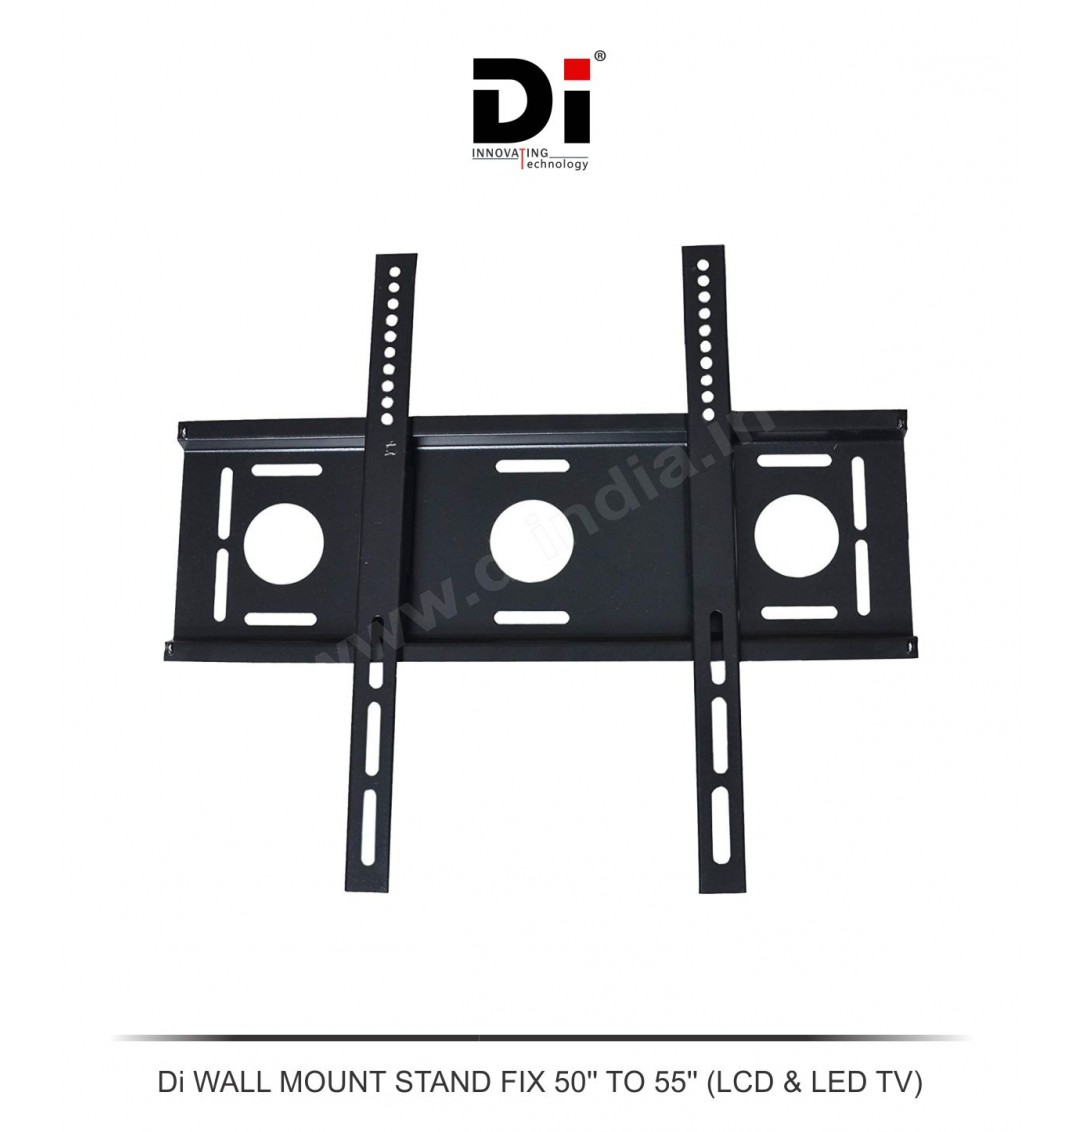 WALL MOUNT STAND FIX 50'' TO 55'' (LCD & LED TV)